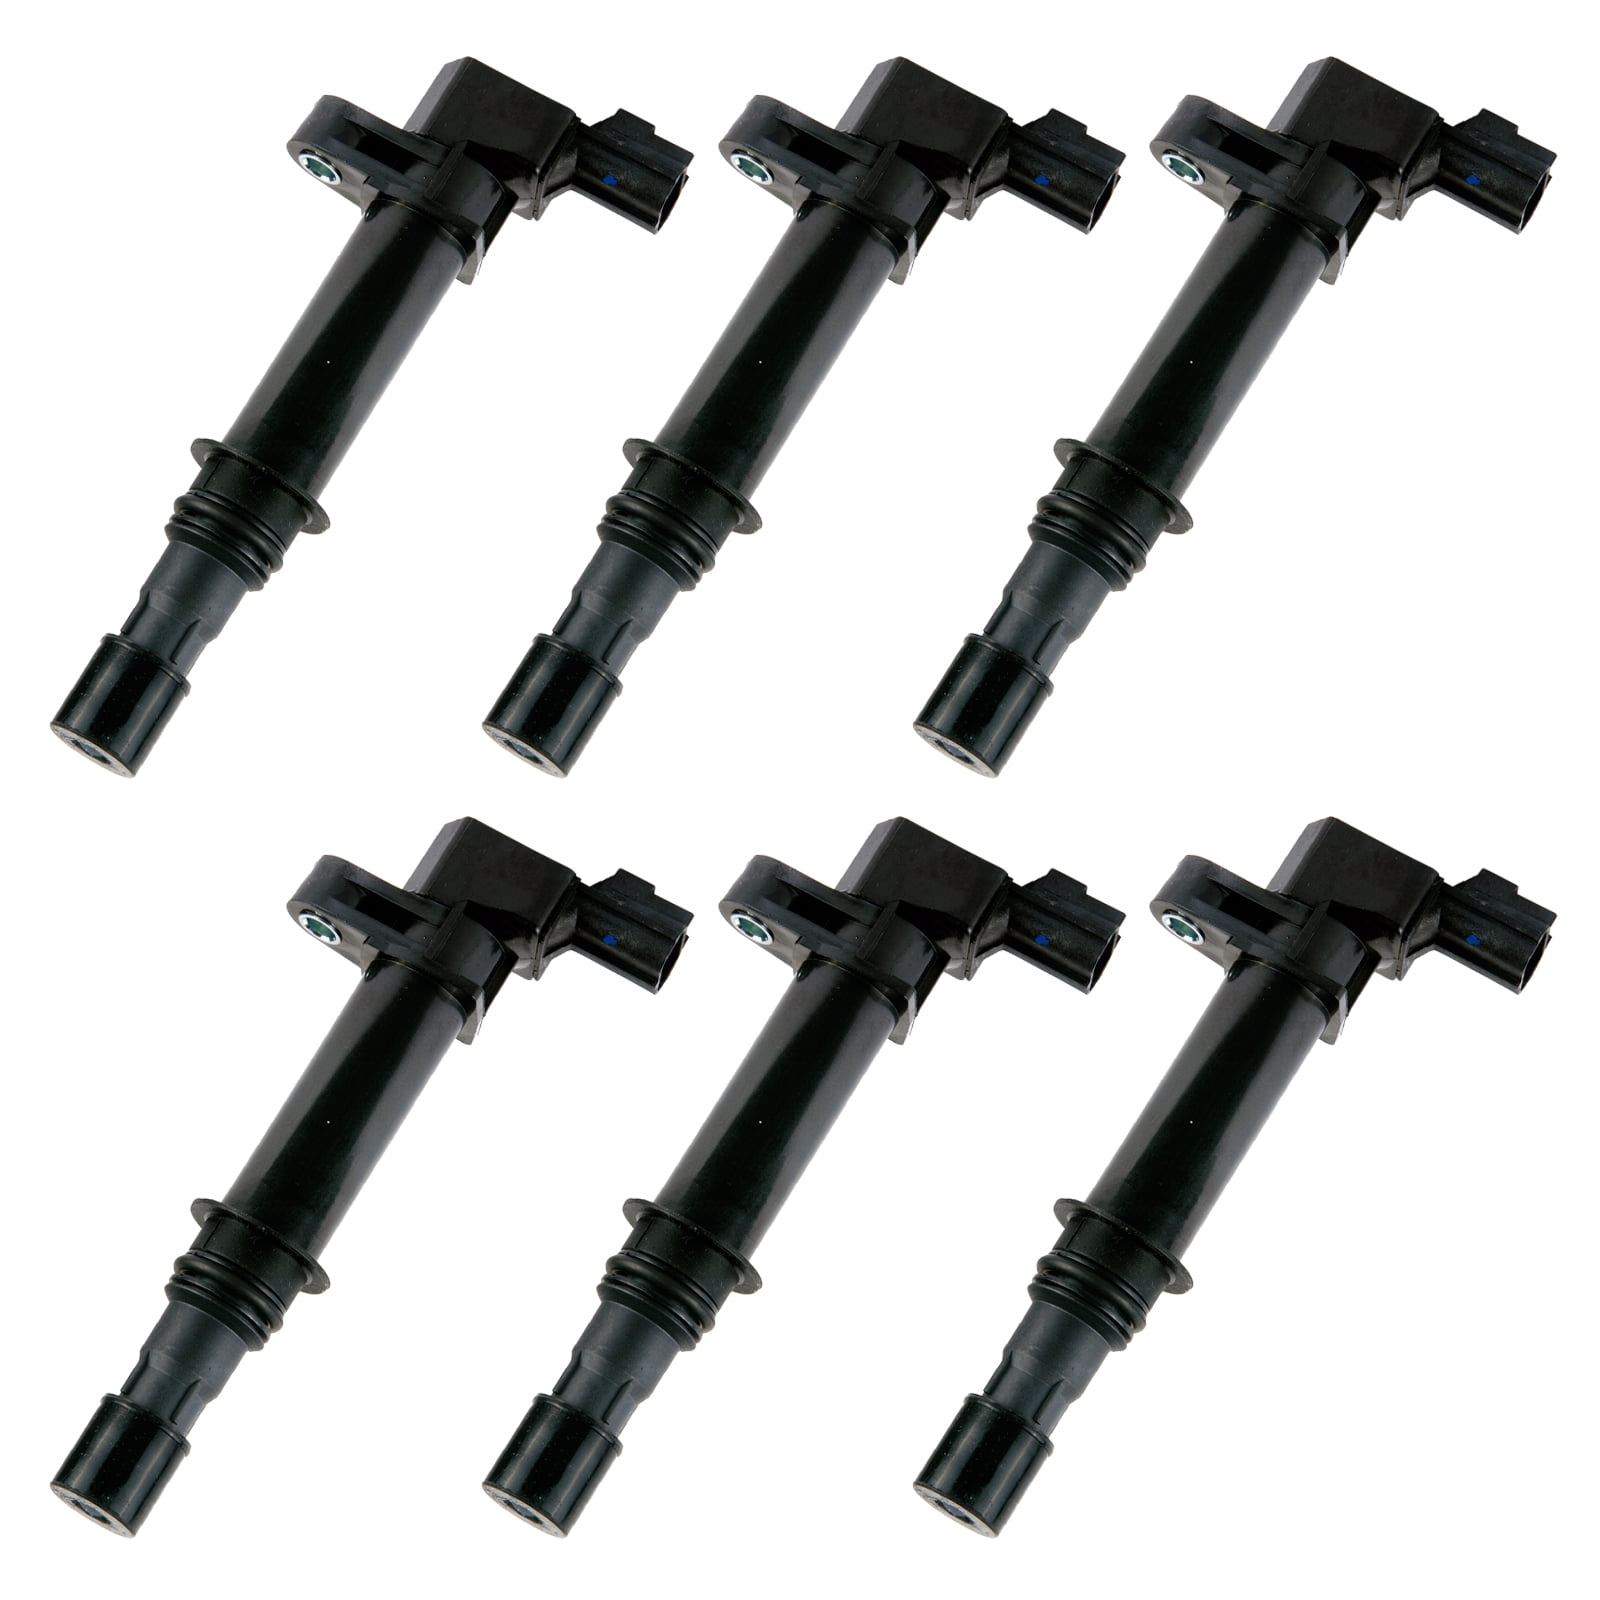 ECCPP Ignition Coils Pack of 1 Compatible with Dodge Jeep Chrysler 2007-2012 Replacement for UF557 C1587 5C1644 